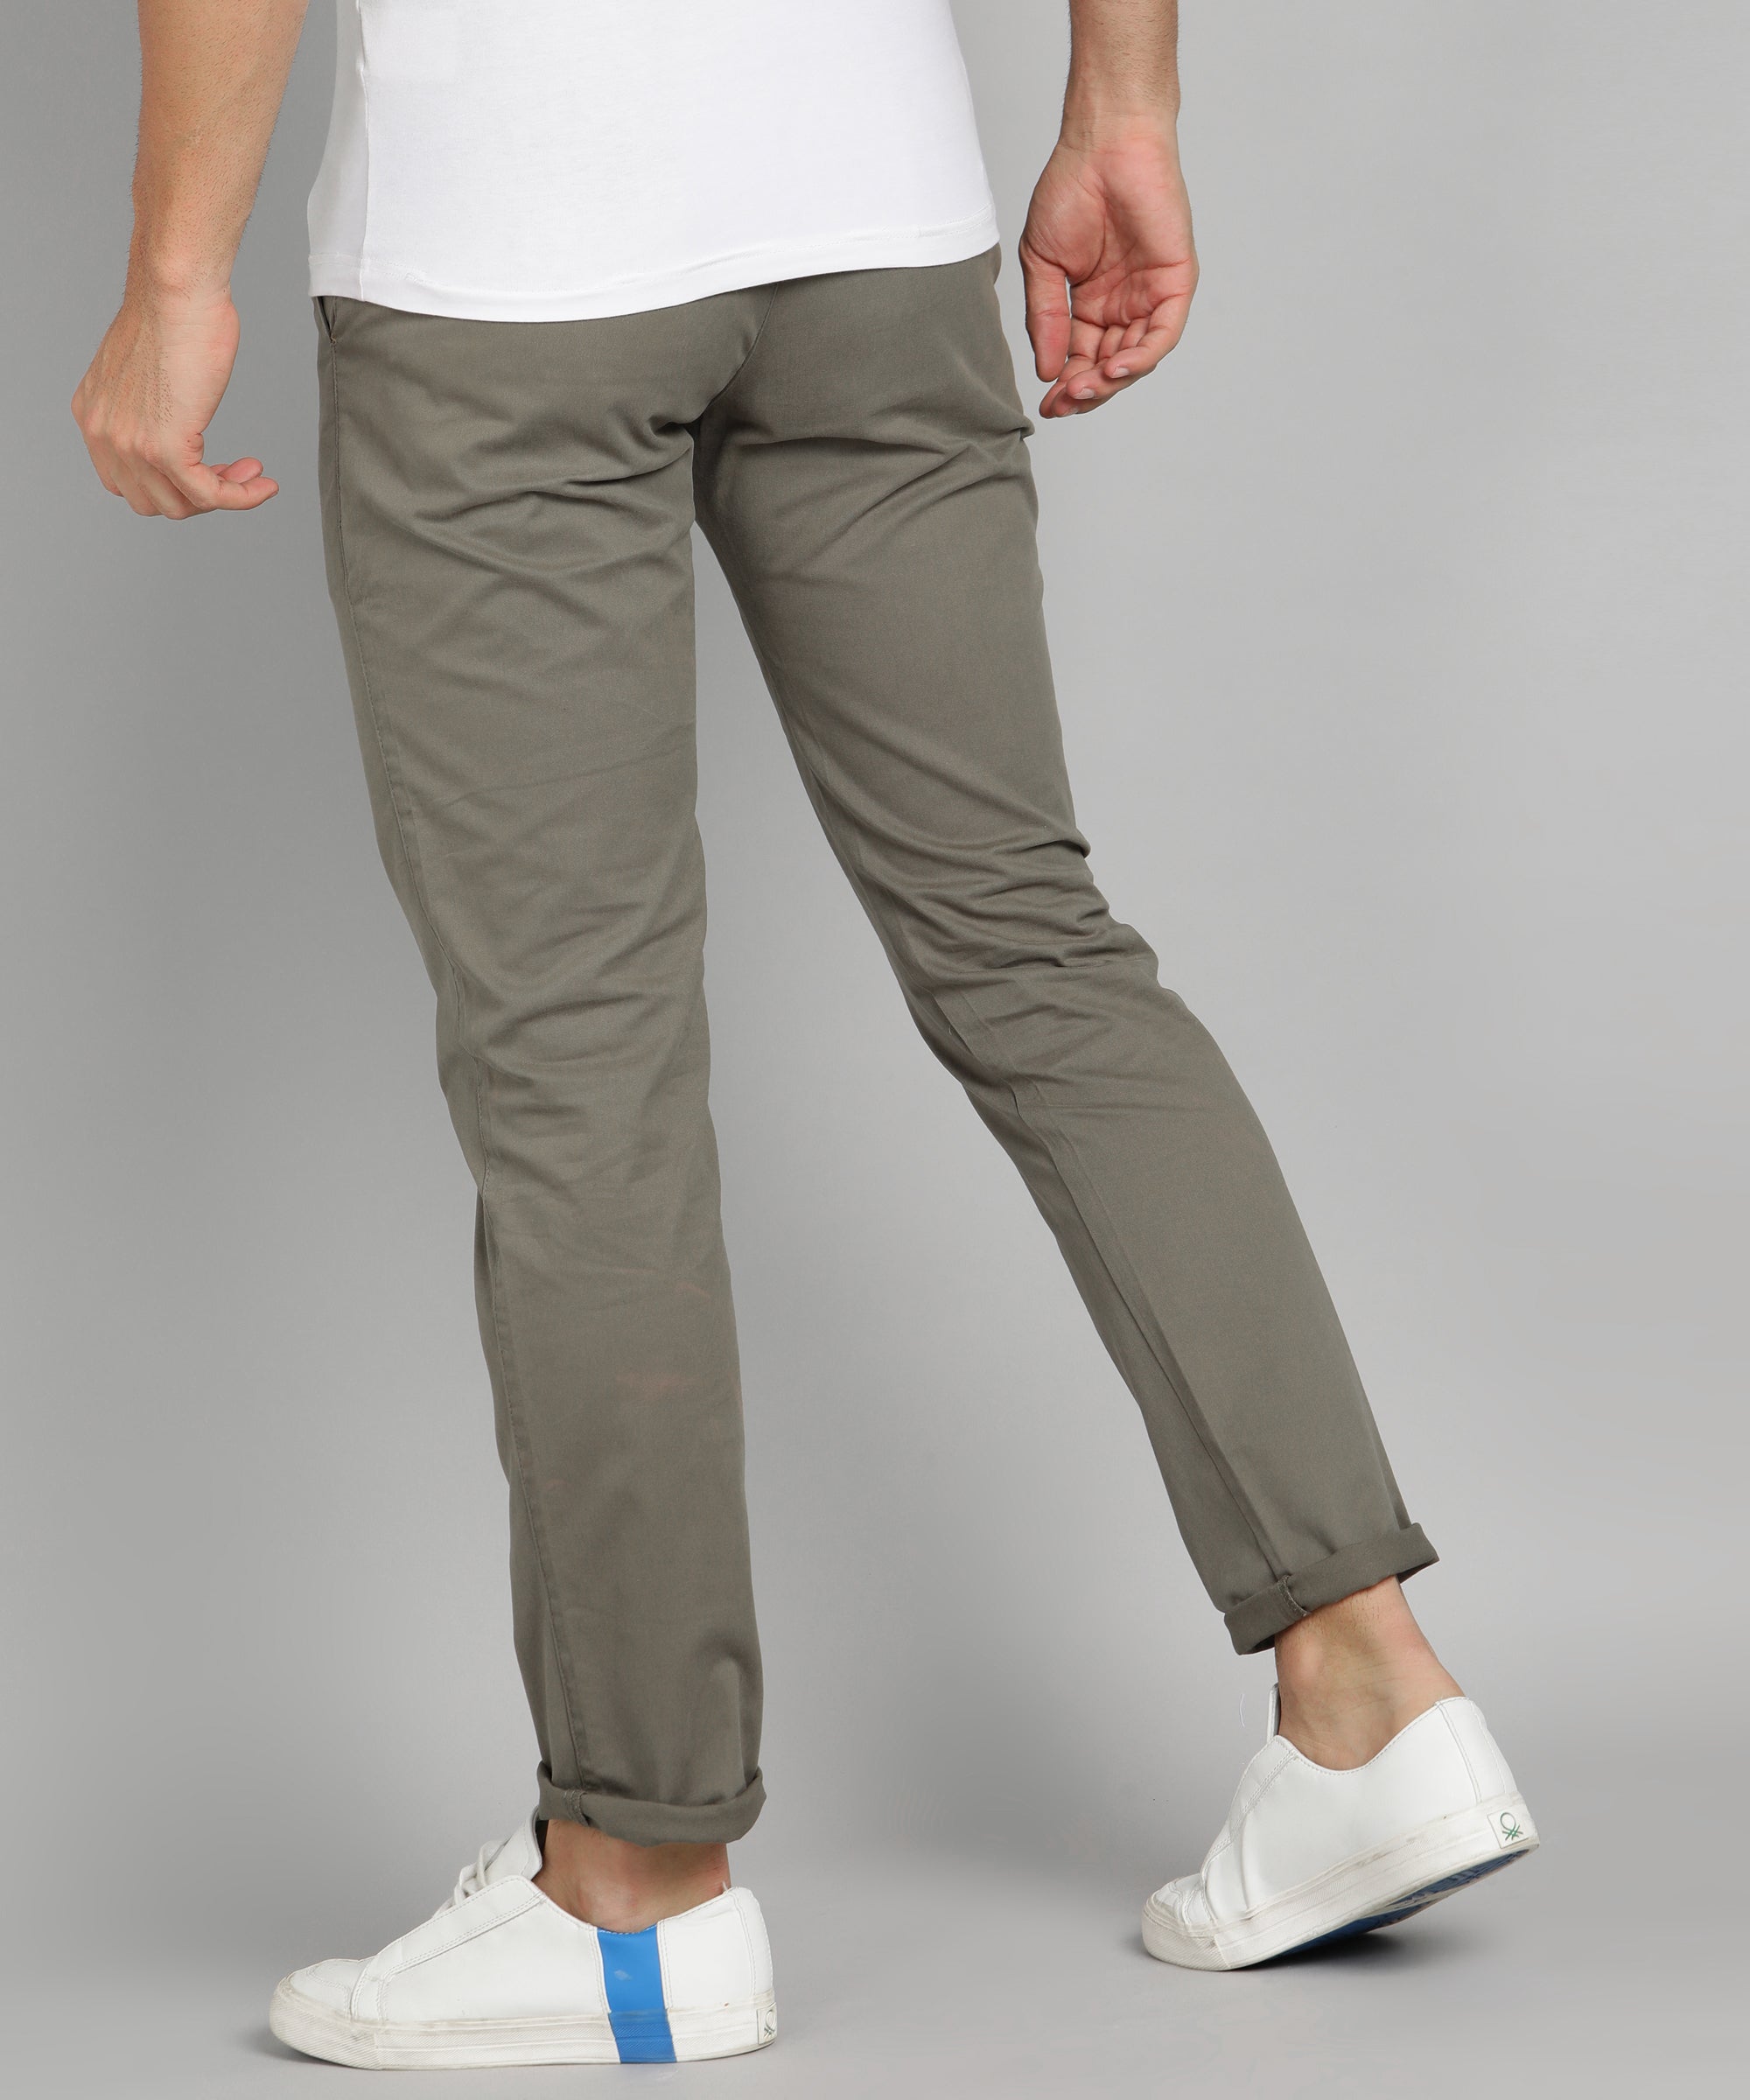 Men's Grey Cotton Slim Fit Casual Chinos Trousers Stretch